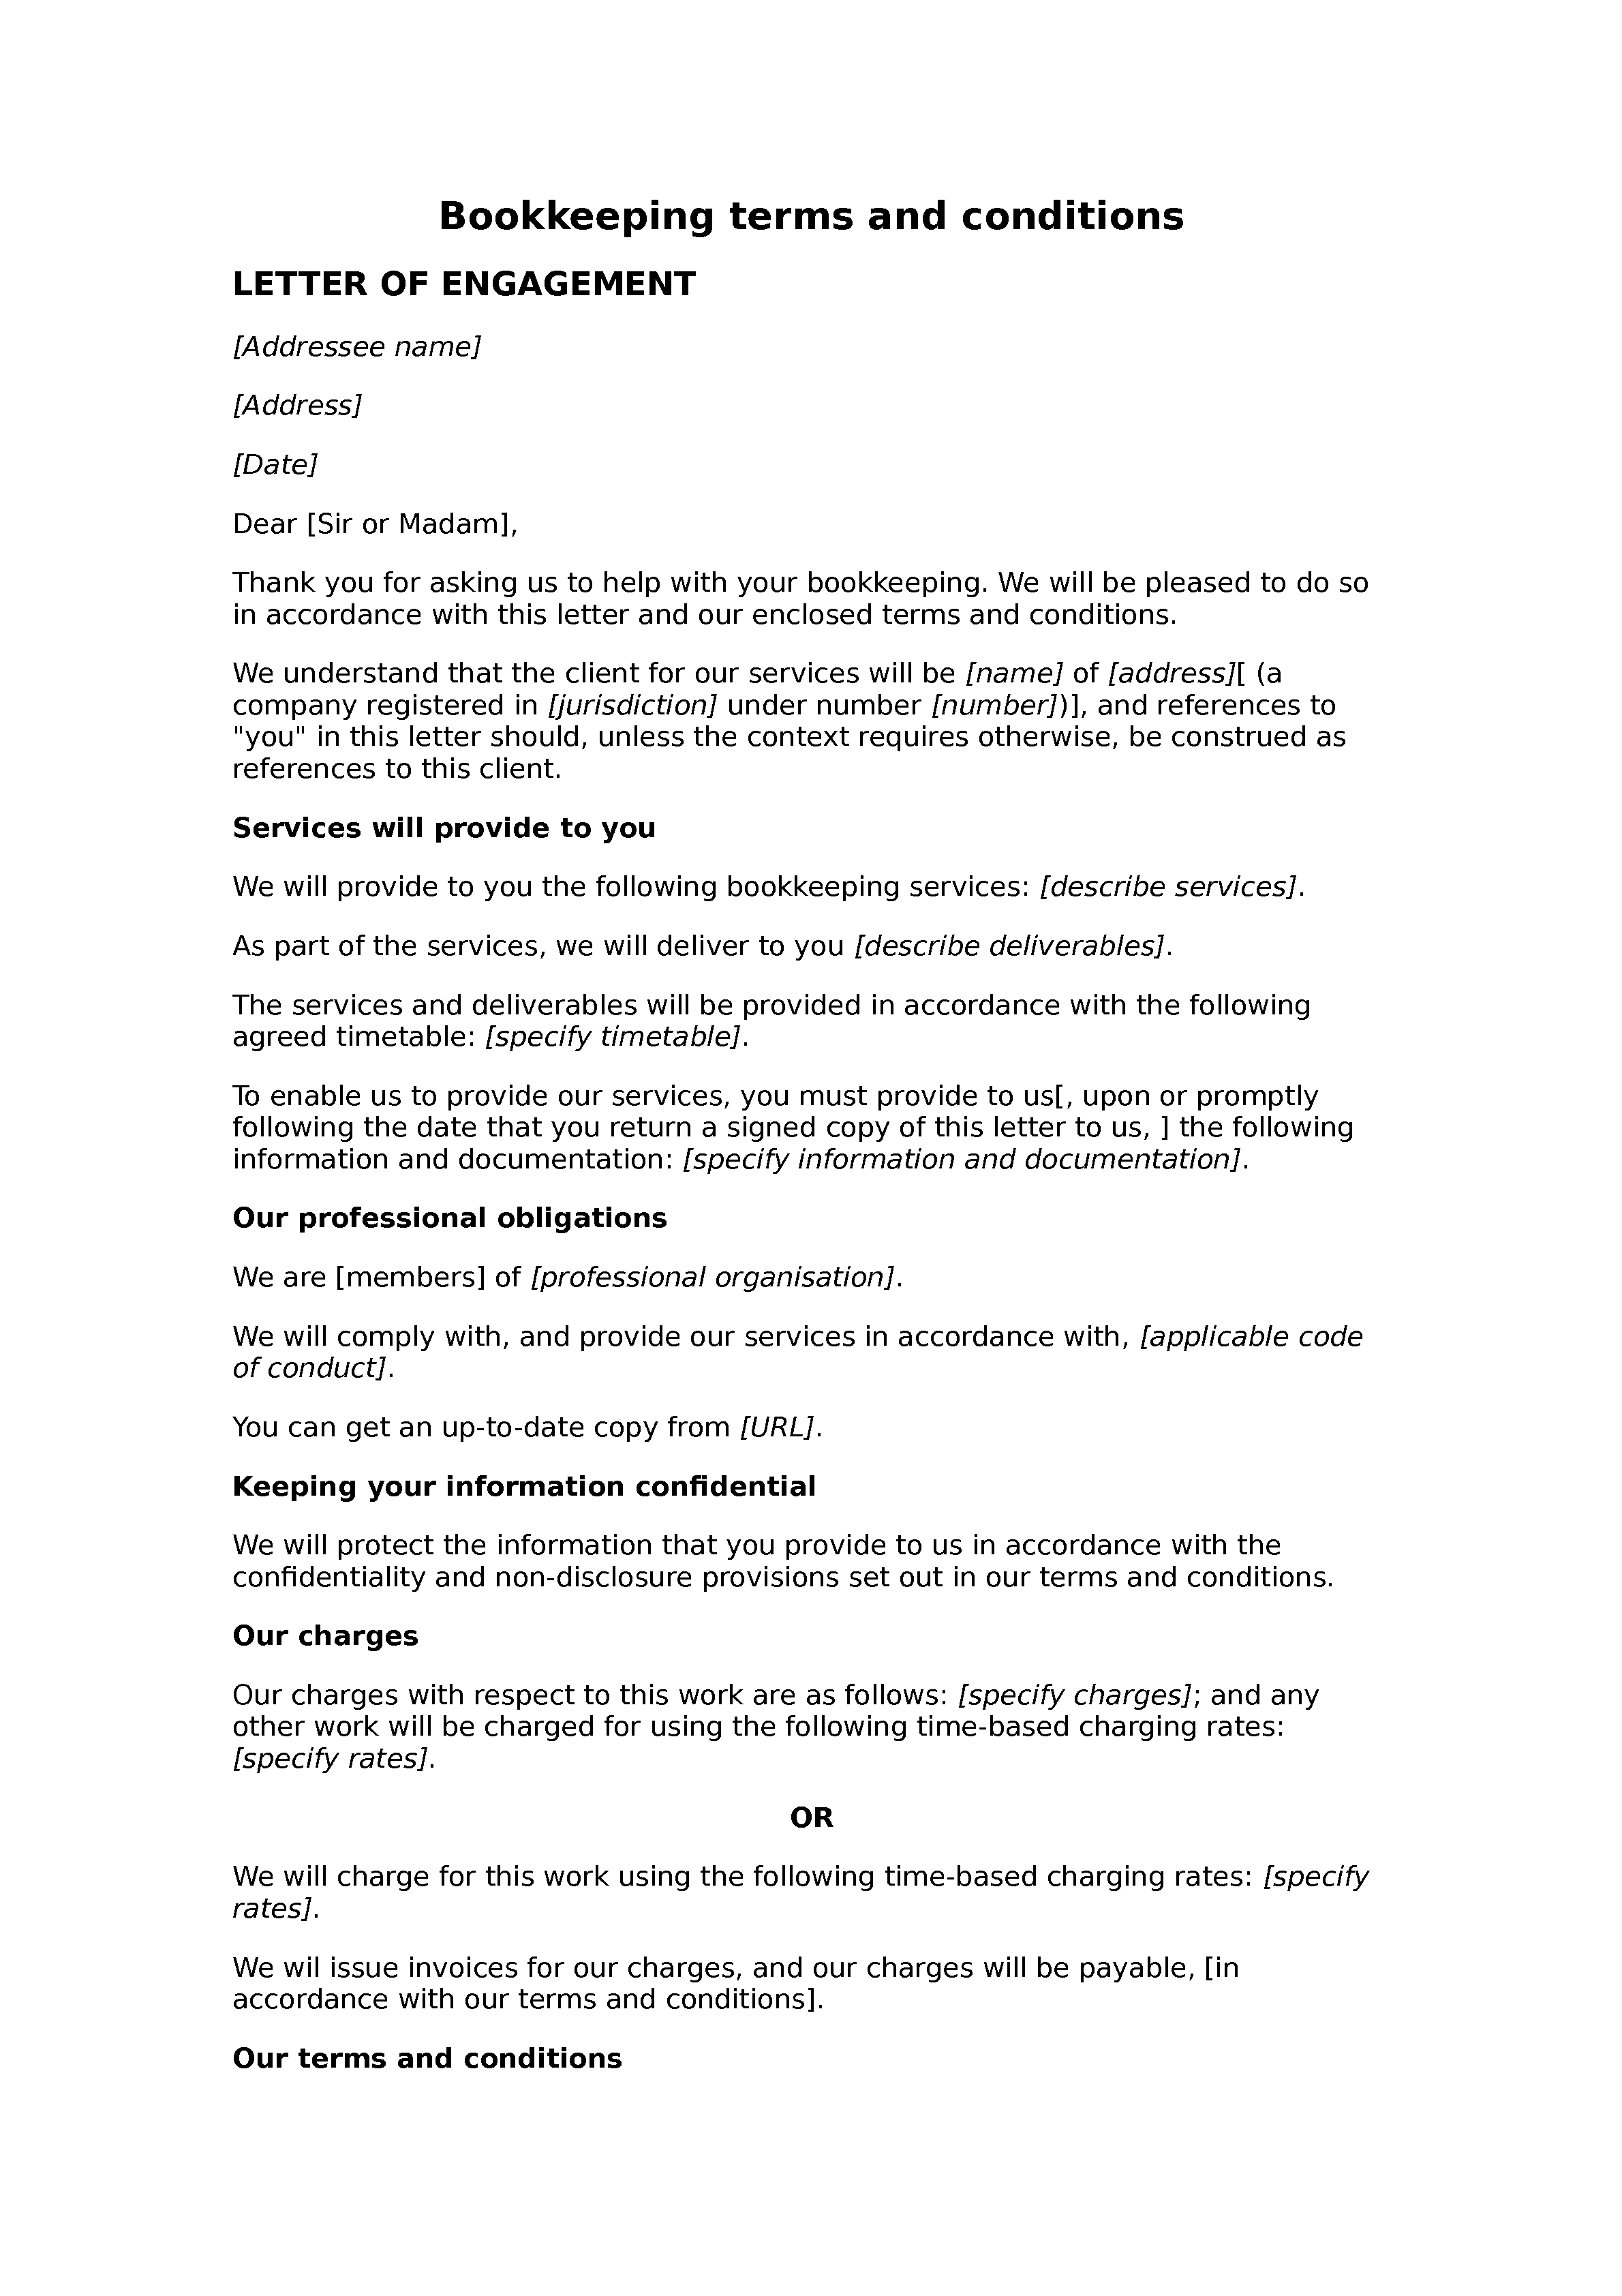 Bookkeeping terms and conditions - Docular Intended For Bookkeeping Letter Of Engagement Template